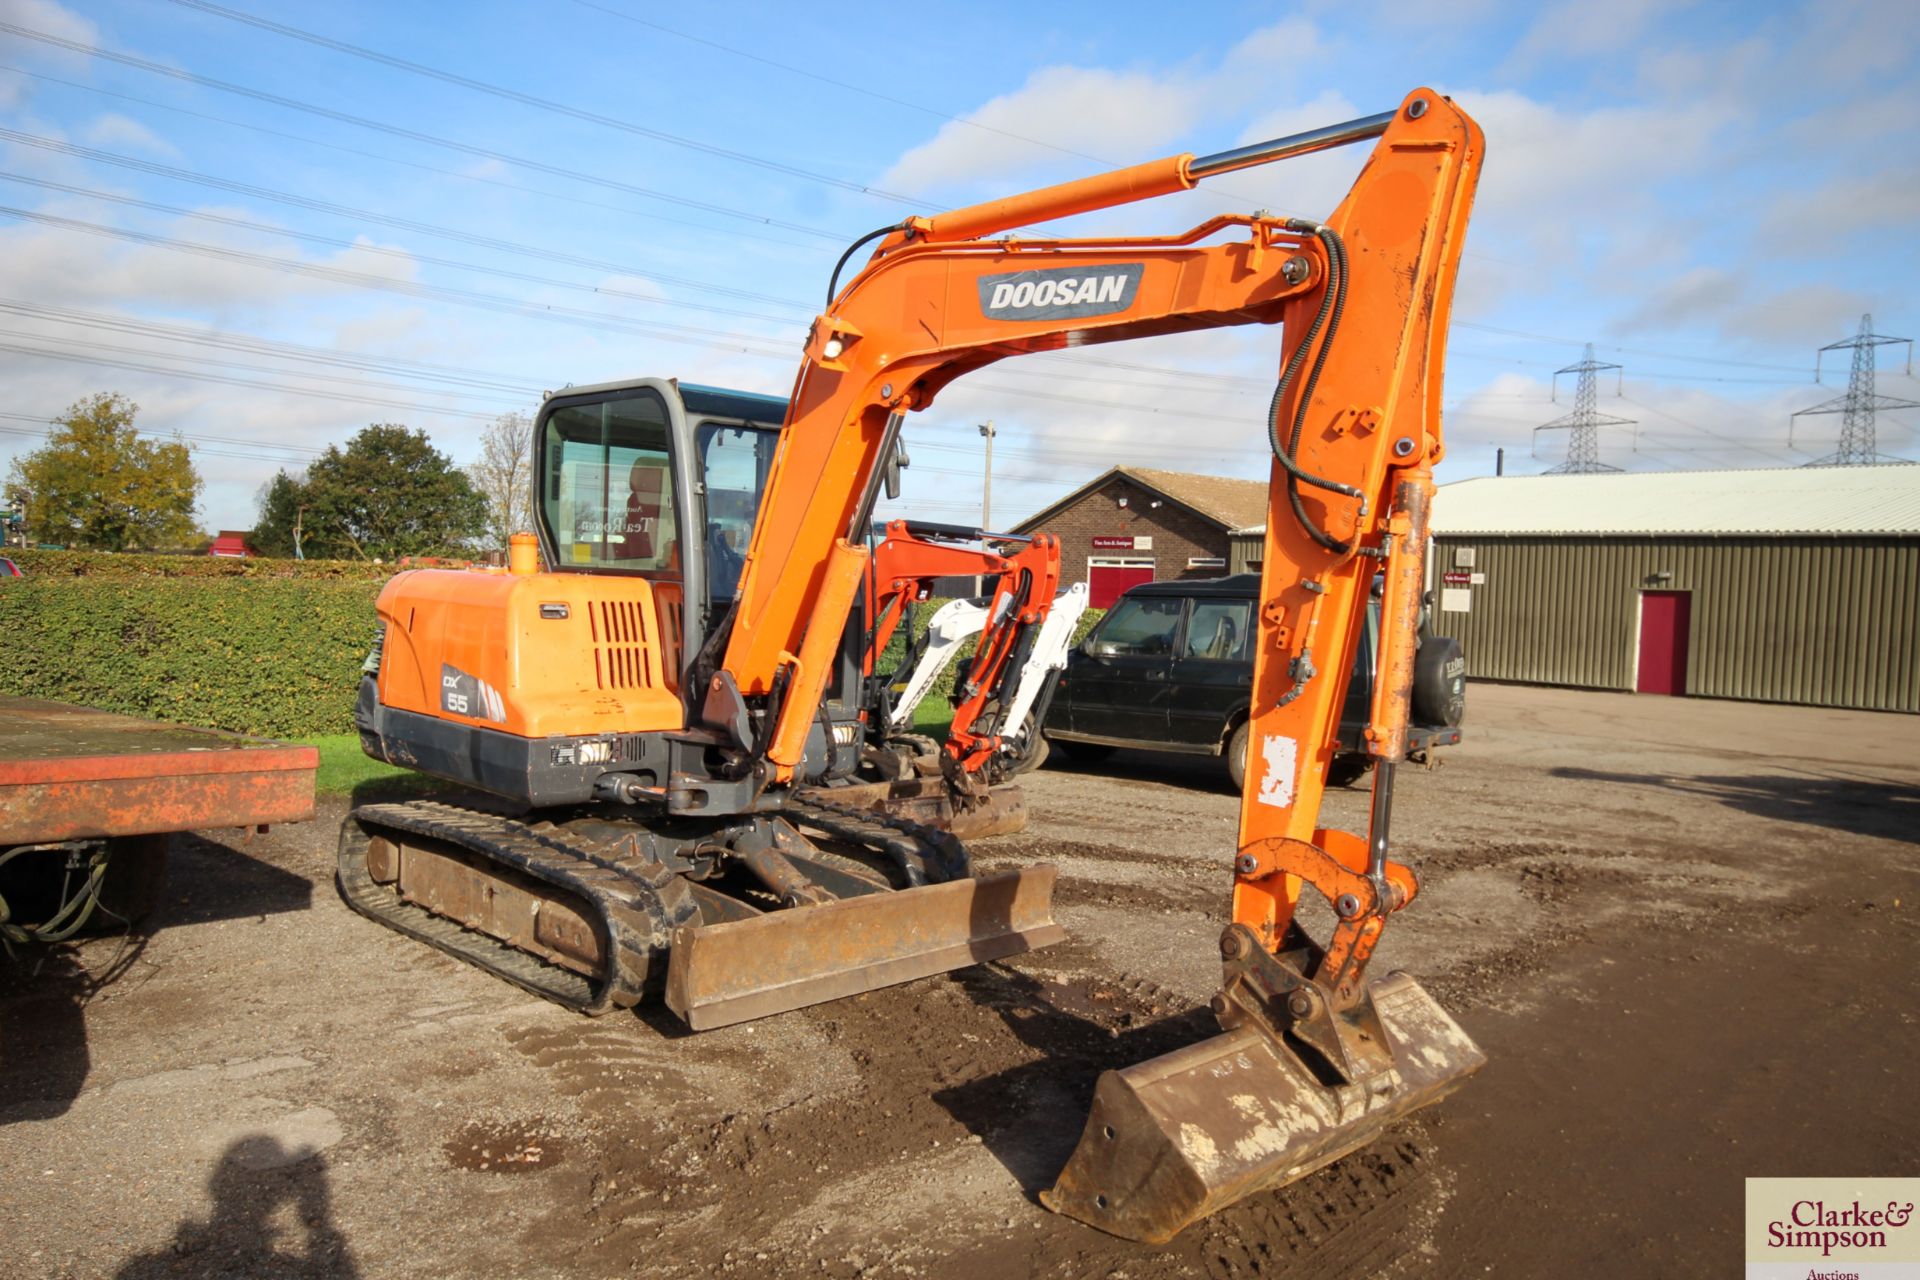 Doosan DX55E 5.5T excavator. 2011. 5,045 hours. Serial number 50461. With new rubber tracks 50 hours - Image 2 of 68